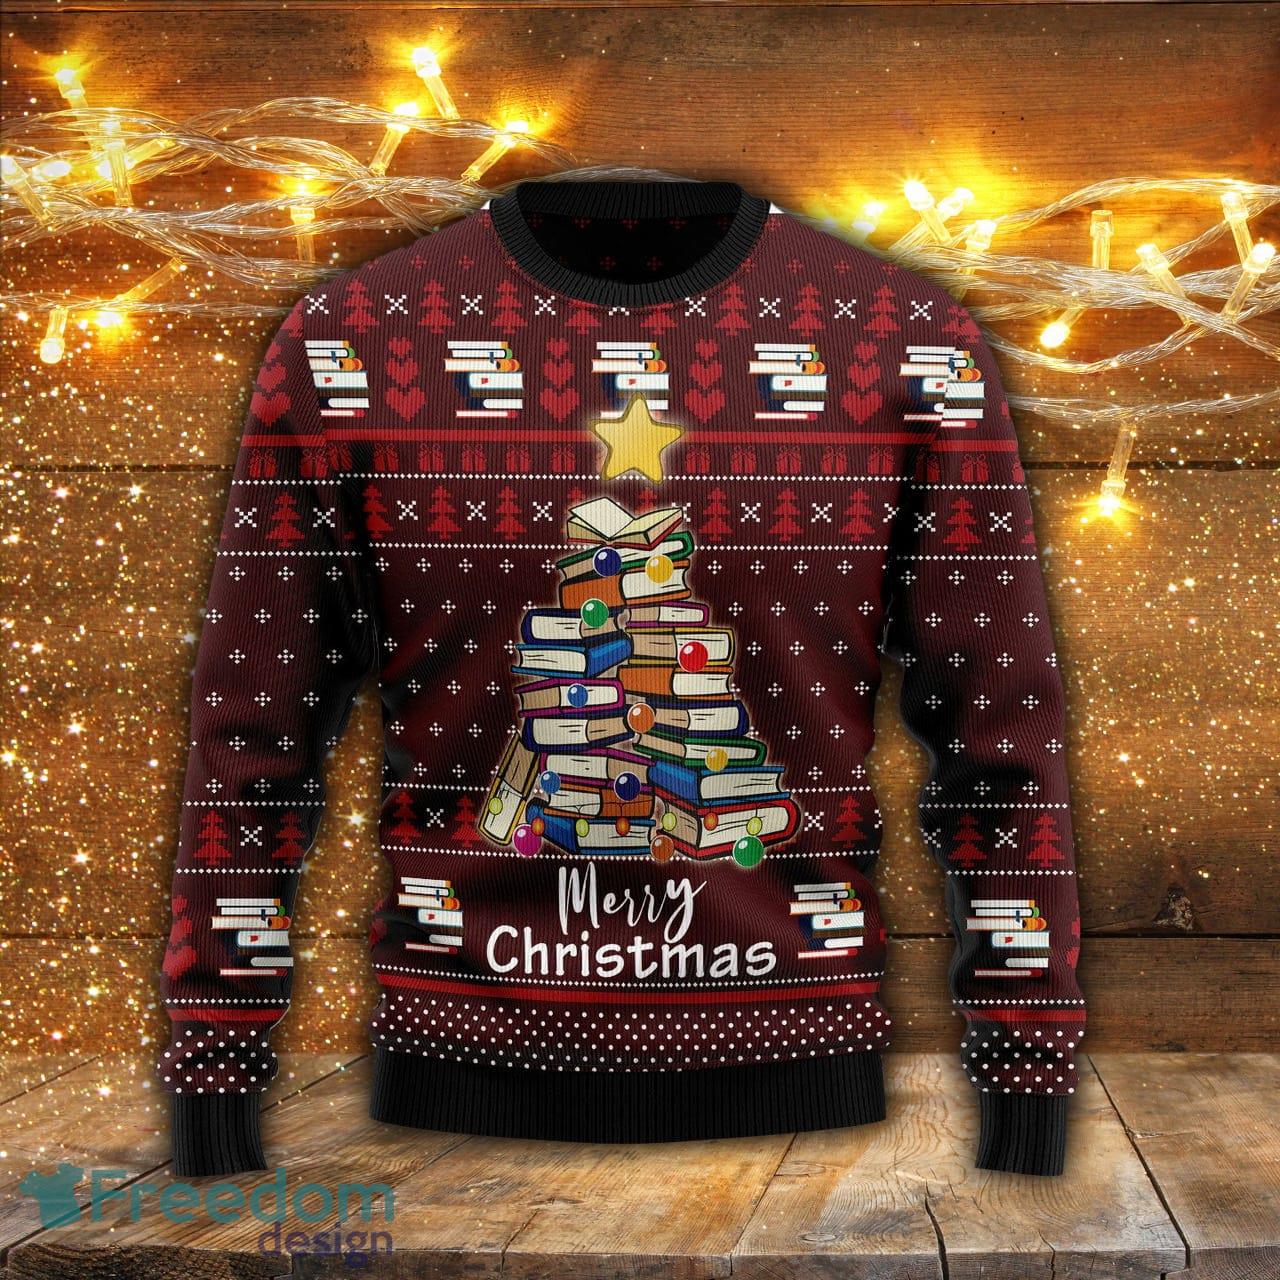 The Retro Vintage 3D Sweater Ugly Christmas Sweater For Men Women -  Freedomdesign